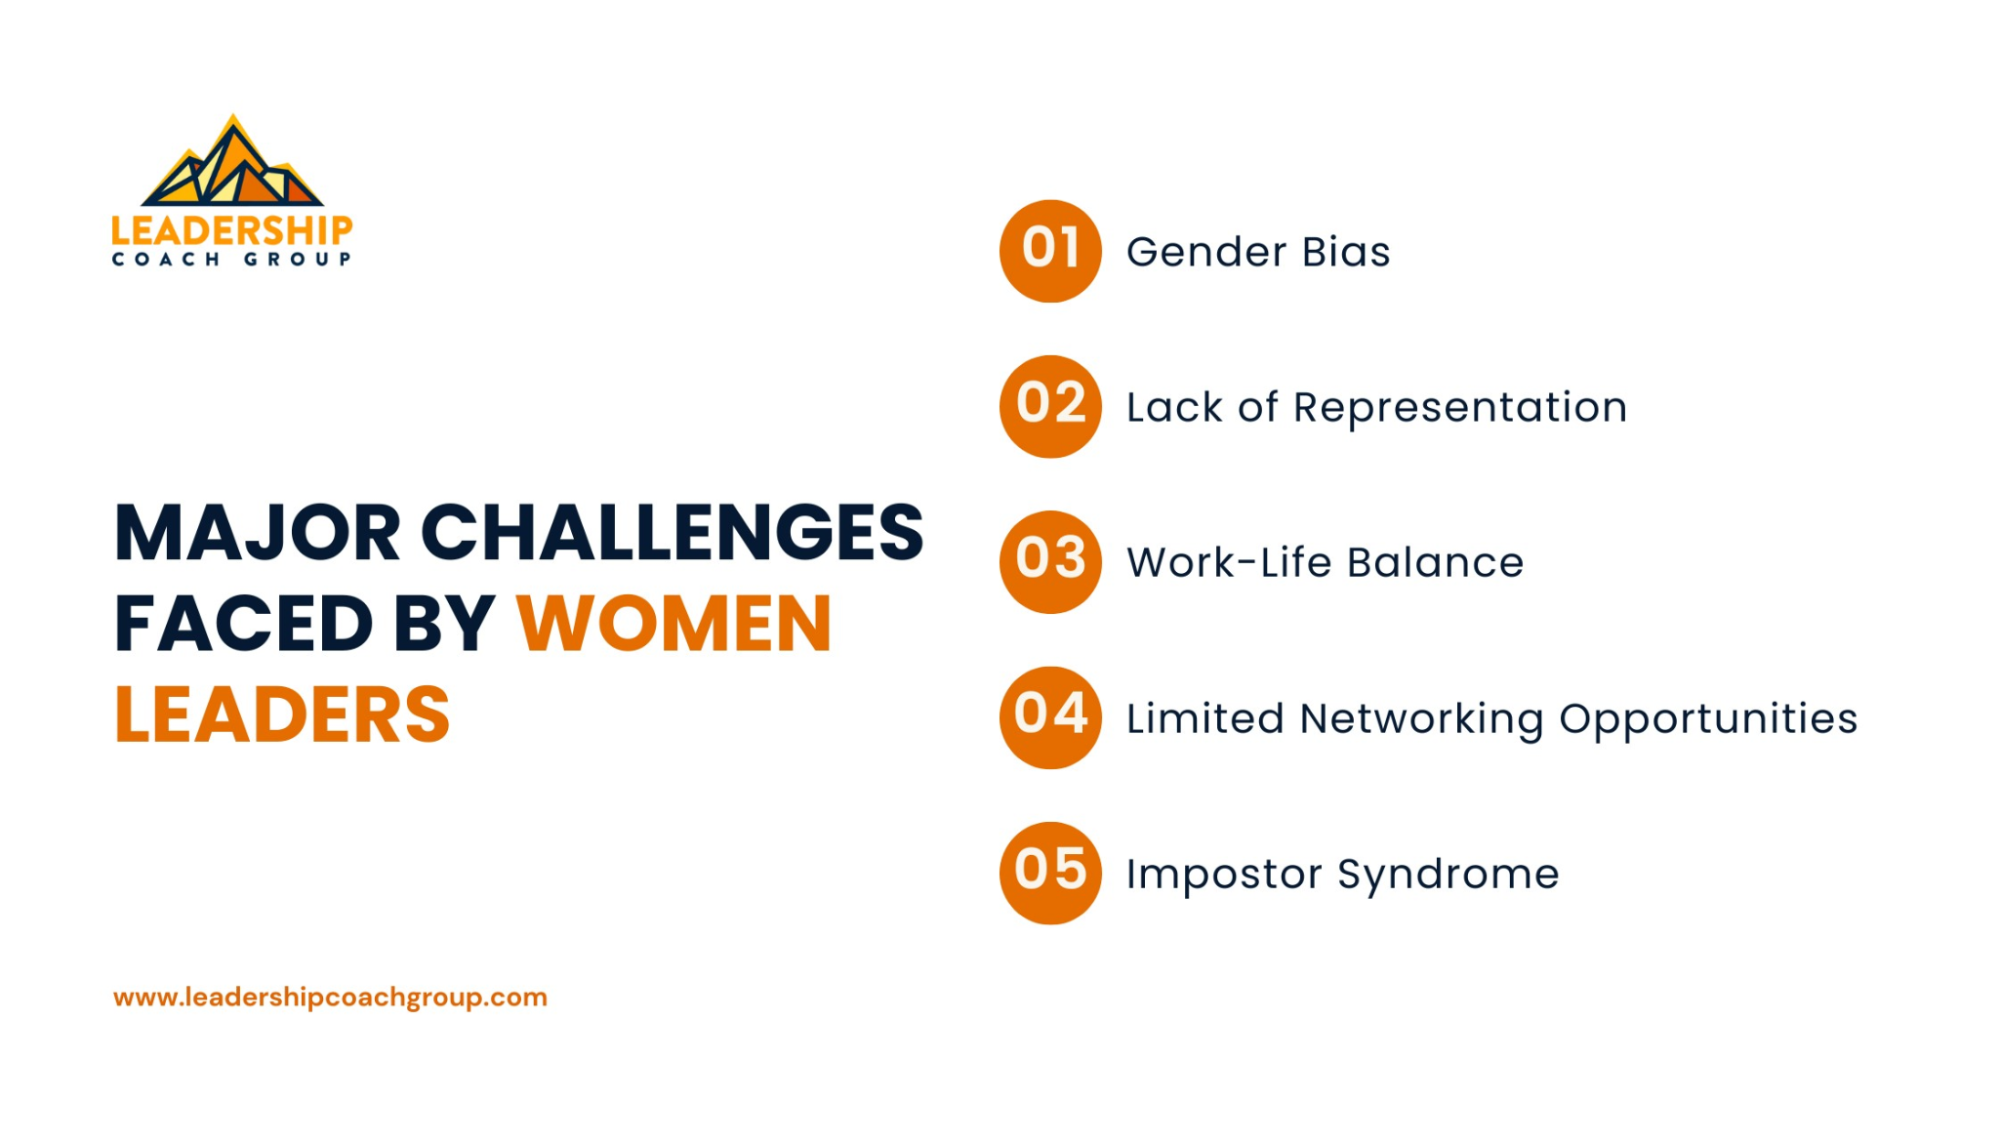 Major Challenges faced by women leaders